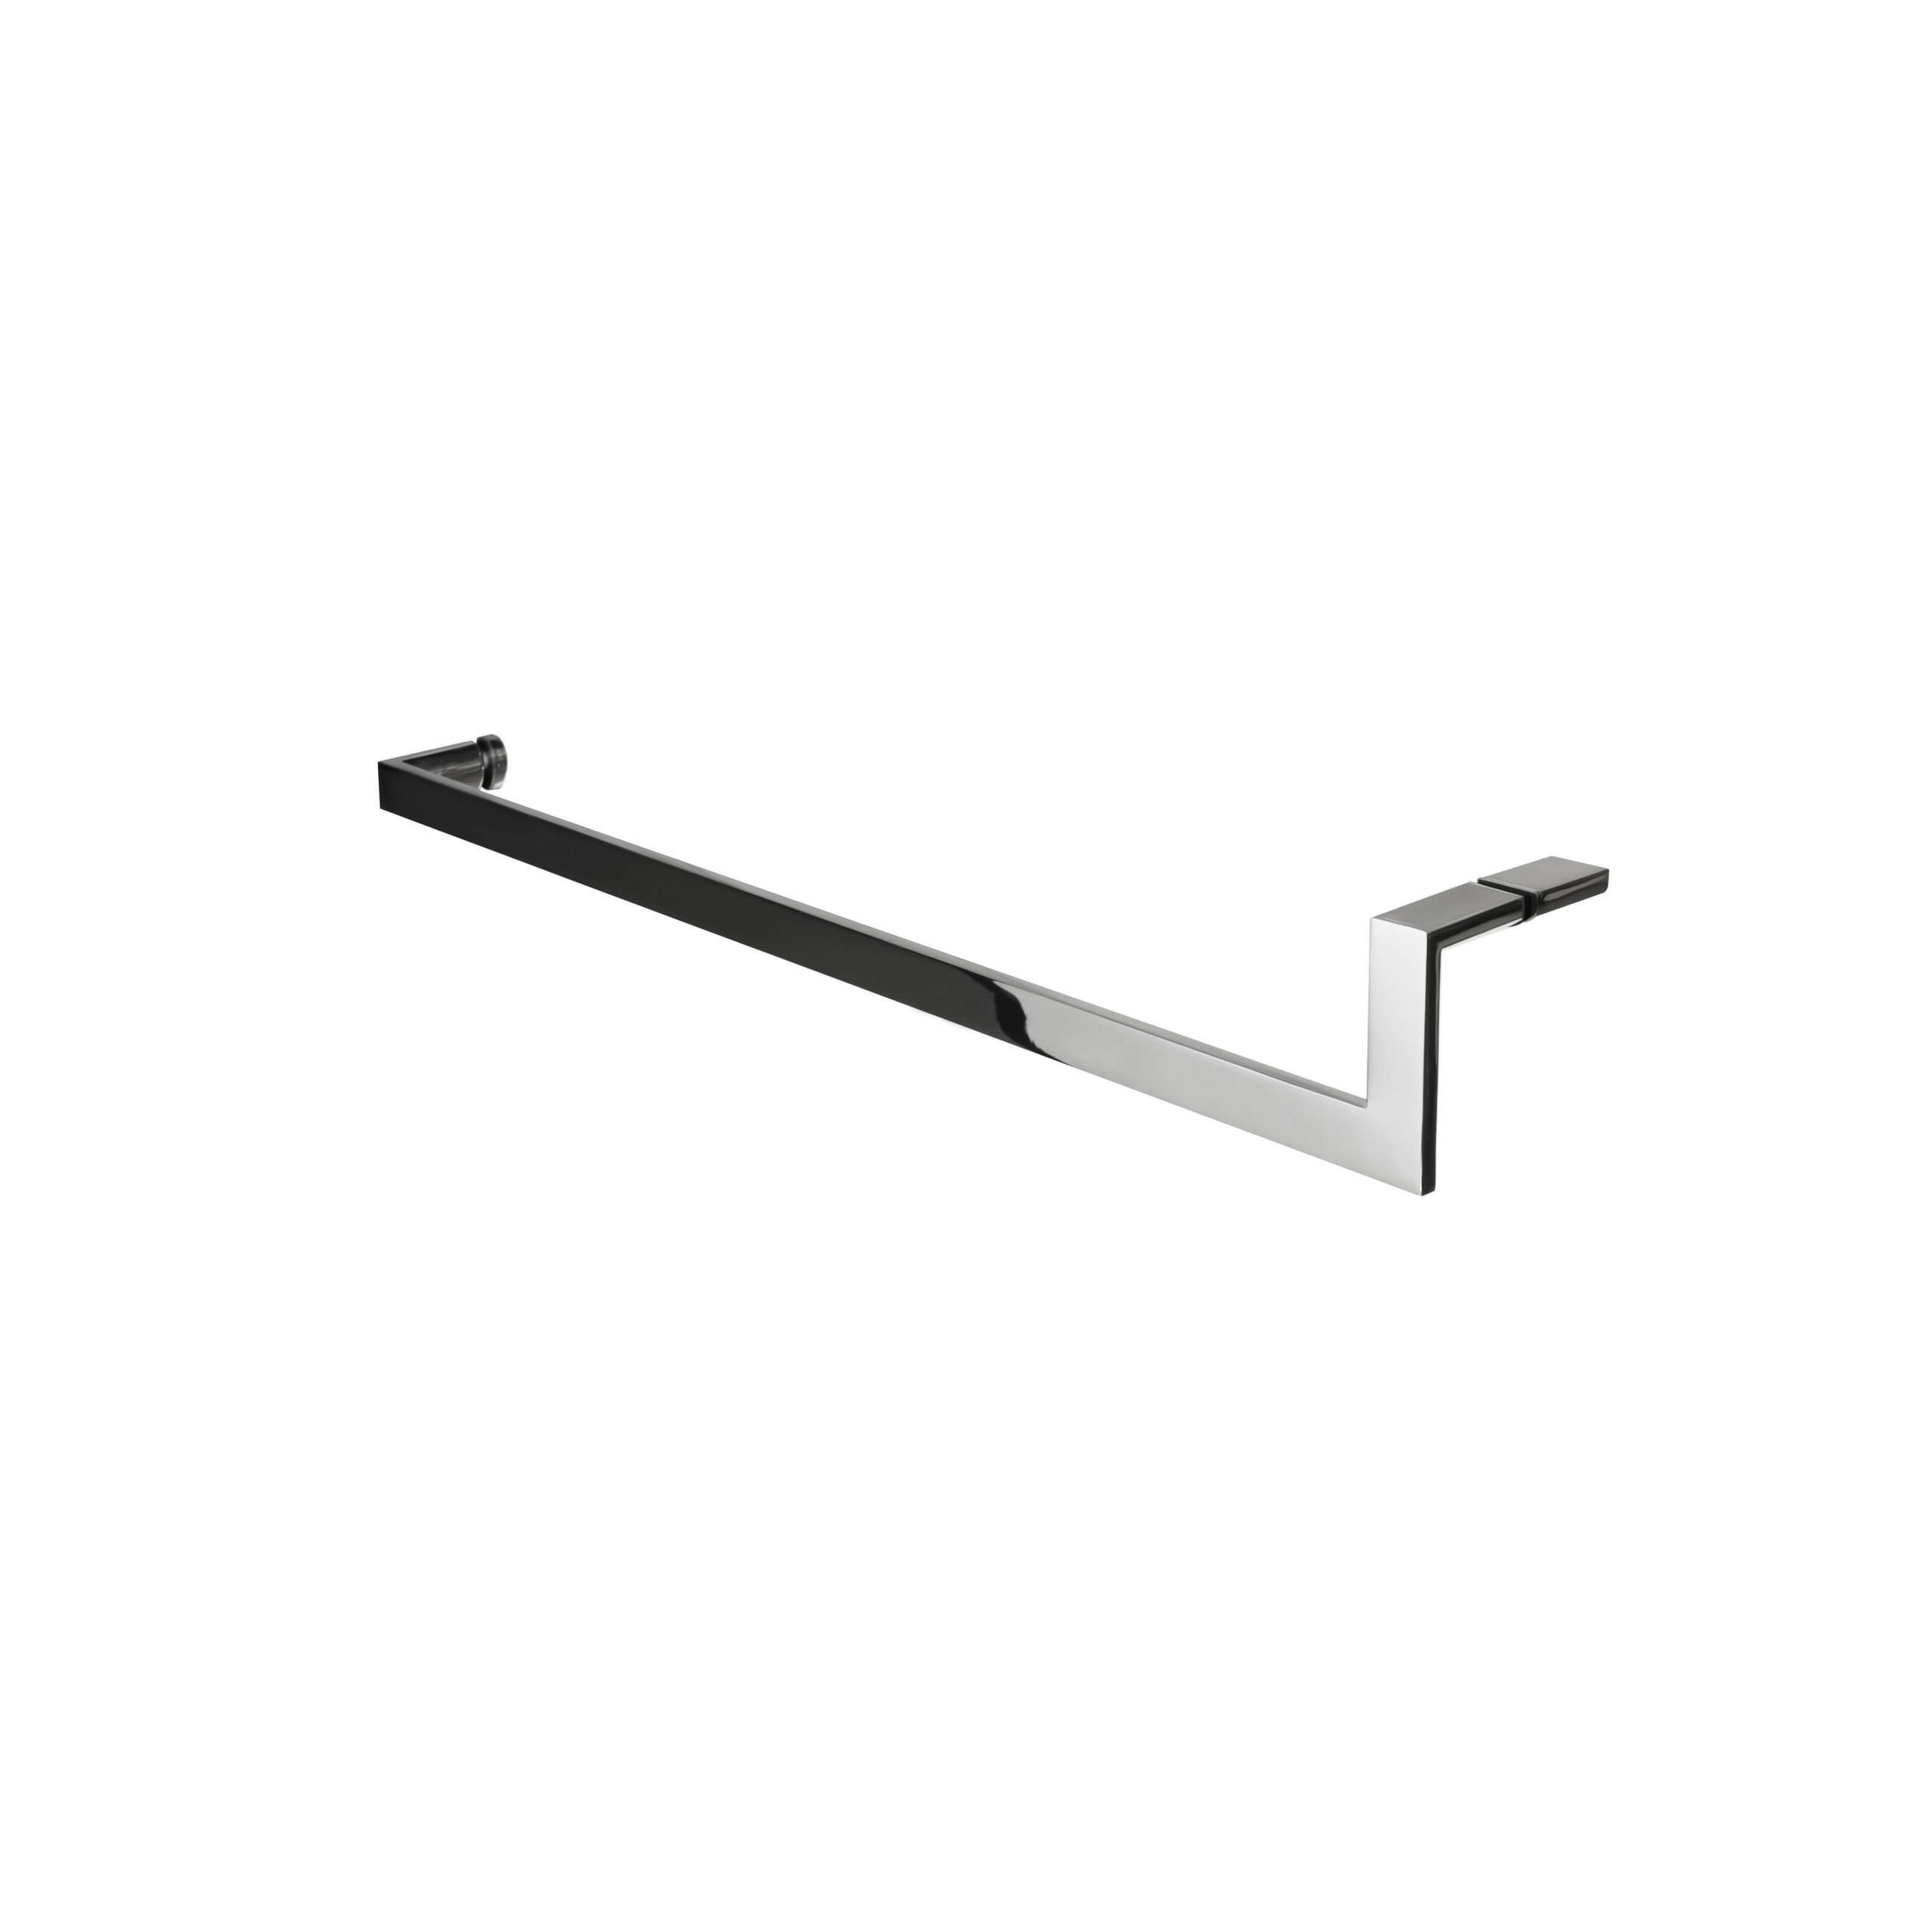 Polished stainless steel modern door handle and pull - towel bar - product featured image - 24 inch length - product SKU LP 402-5 PSS